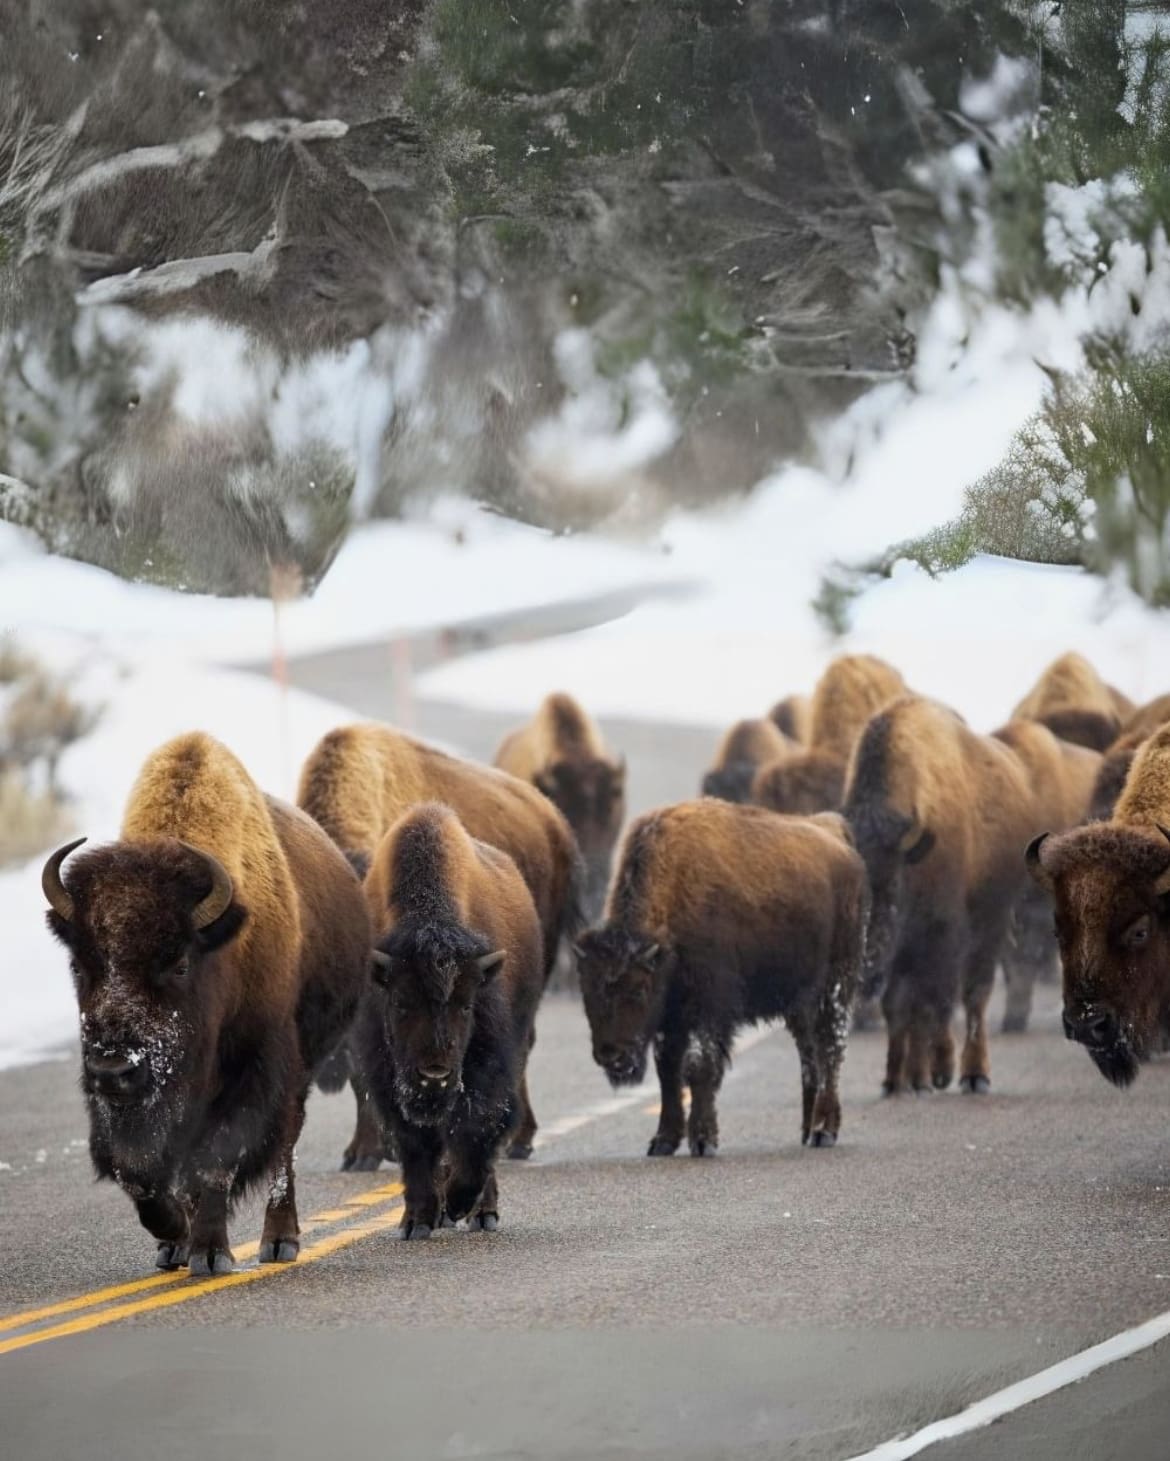 Bison in the road, Yellowstone